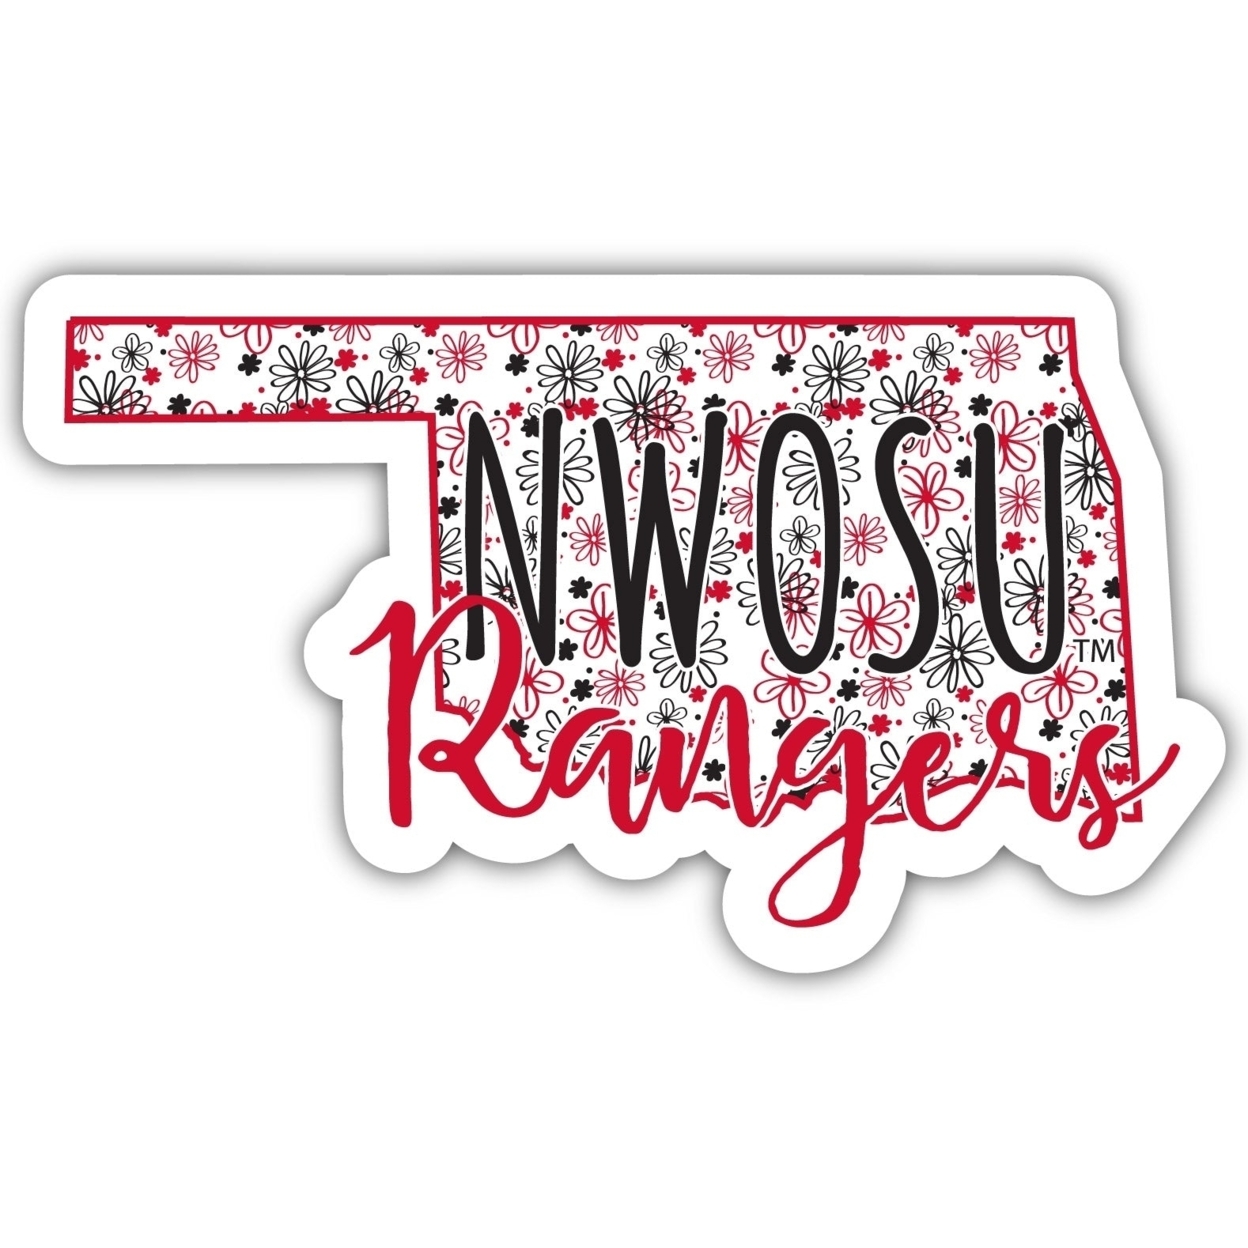 Northwestern Oklahoma State University Floral State Die Cut Decal 2-Inch